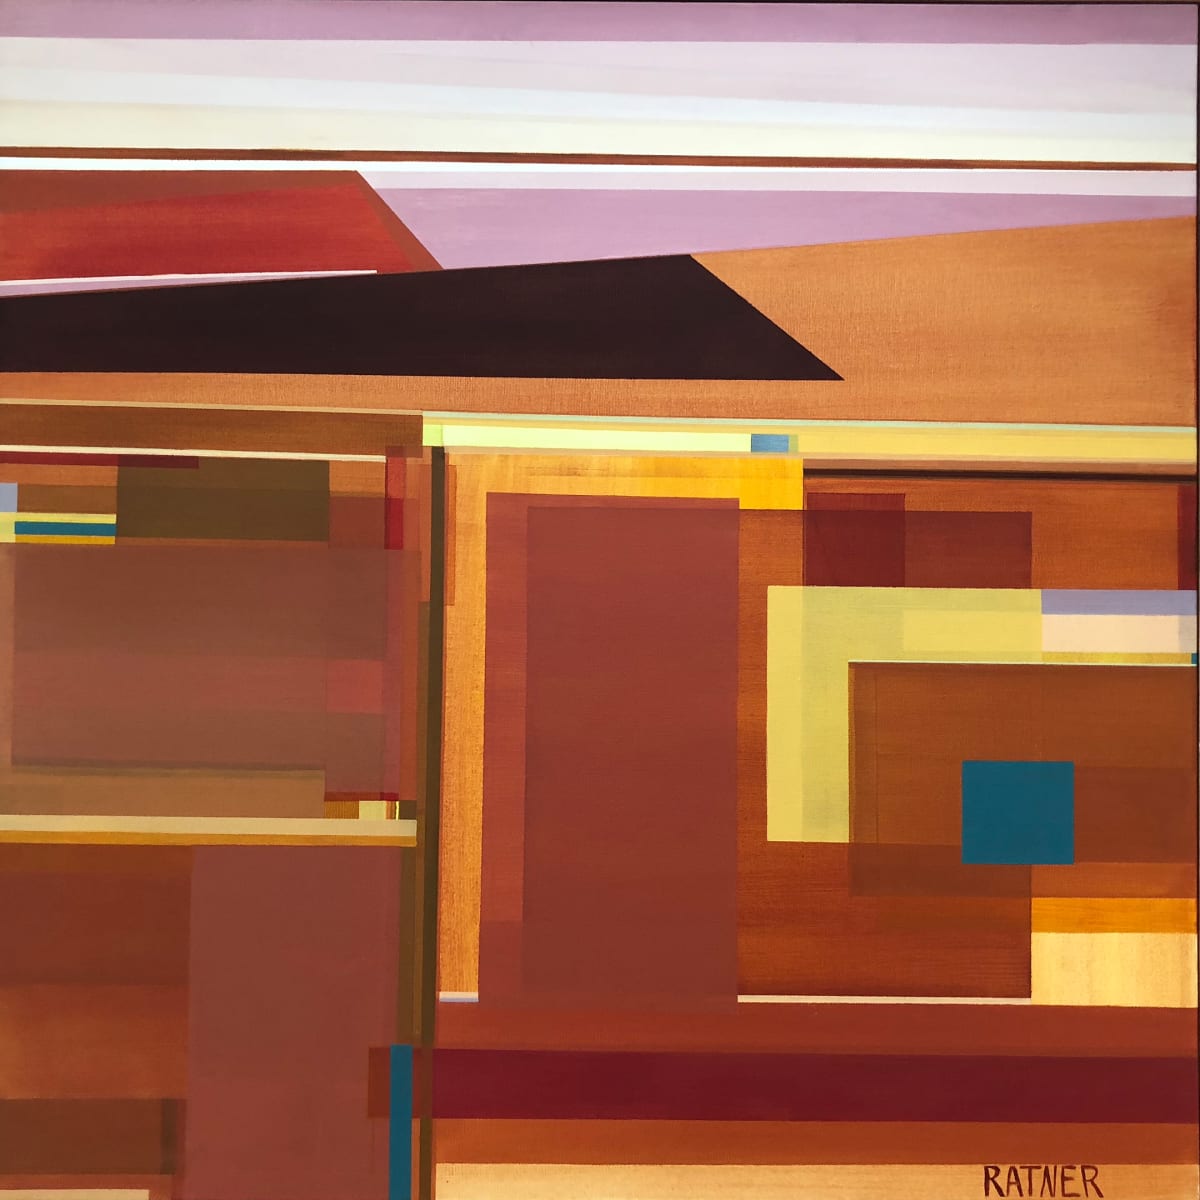 Place of Compassion by Shilo Ratner  Image: Place of Compassion, 36" x 36", Acrylic on Canvas